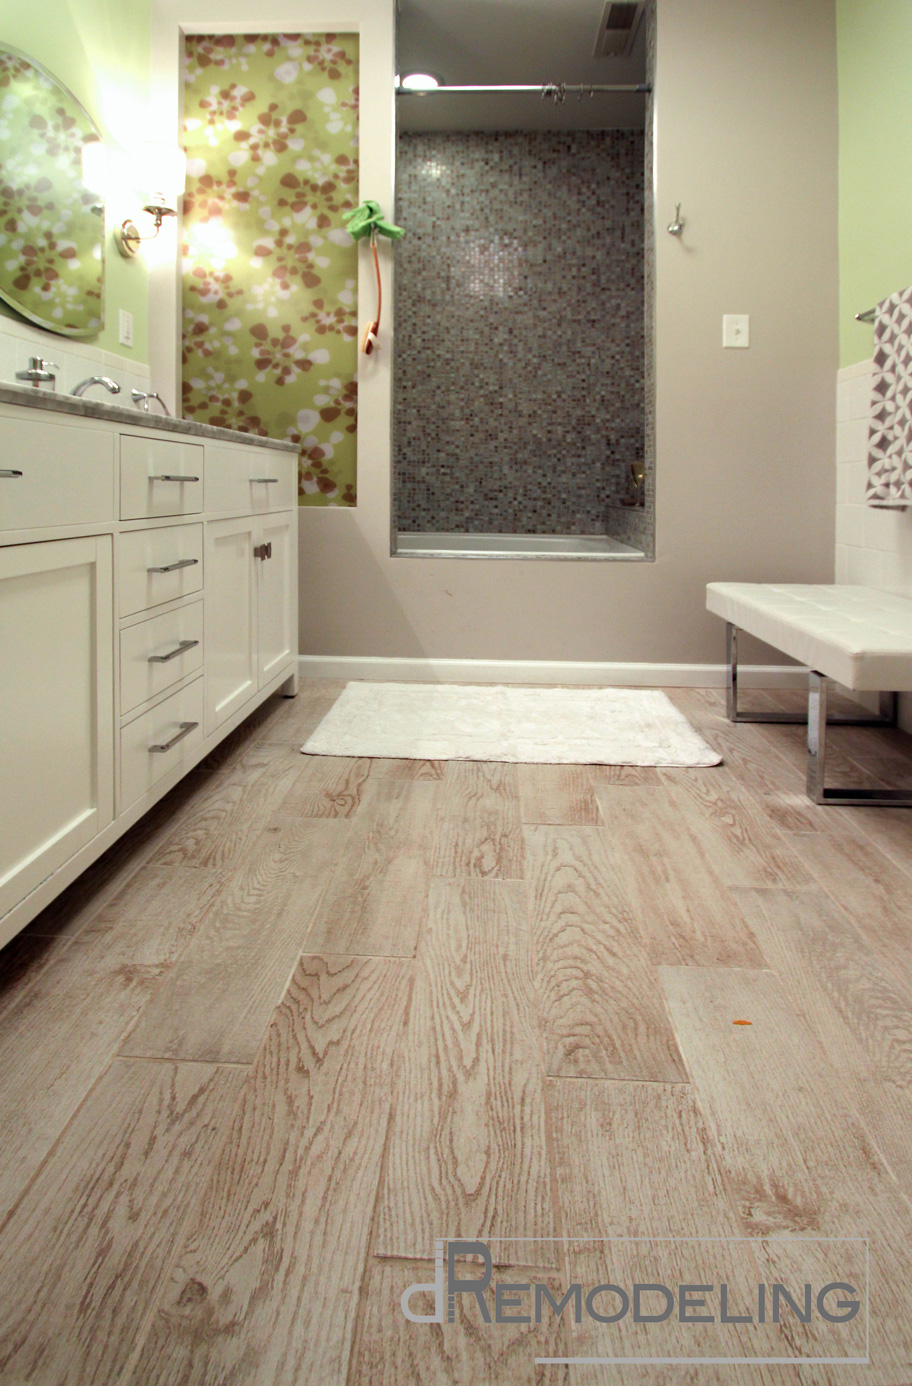 27 pictures and ideas of wood effect bathroom floor tile 2020